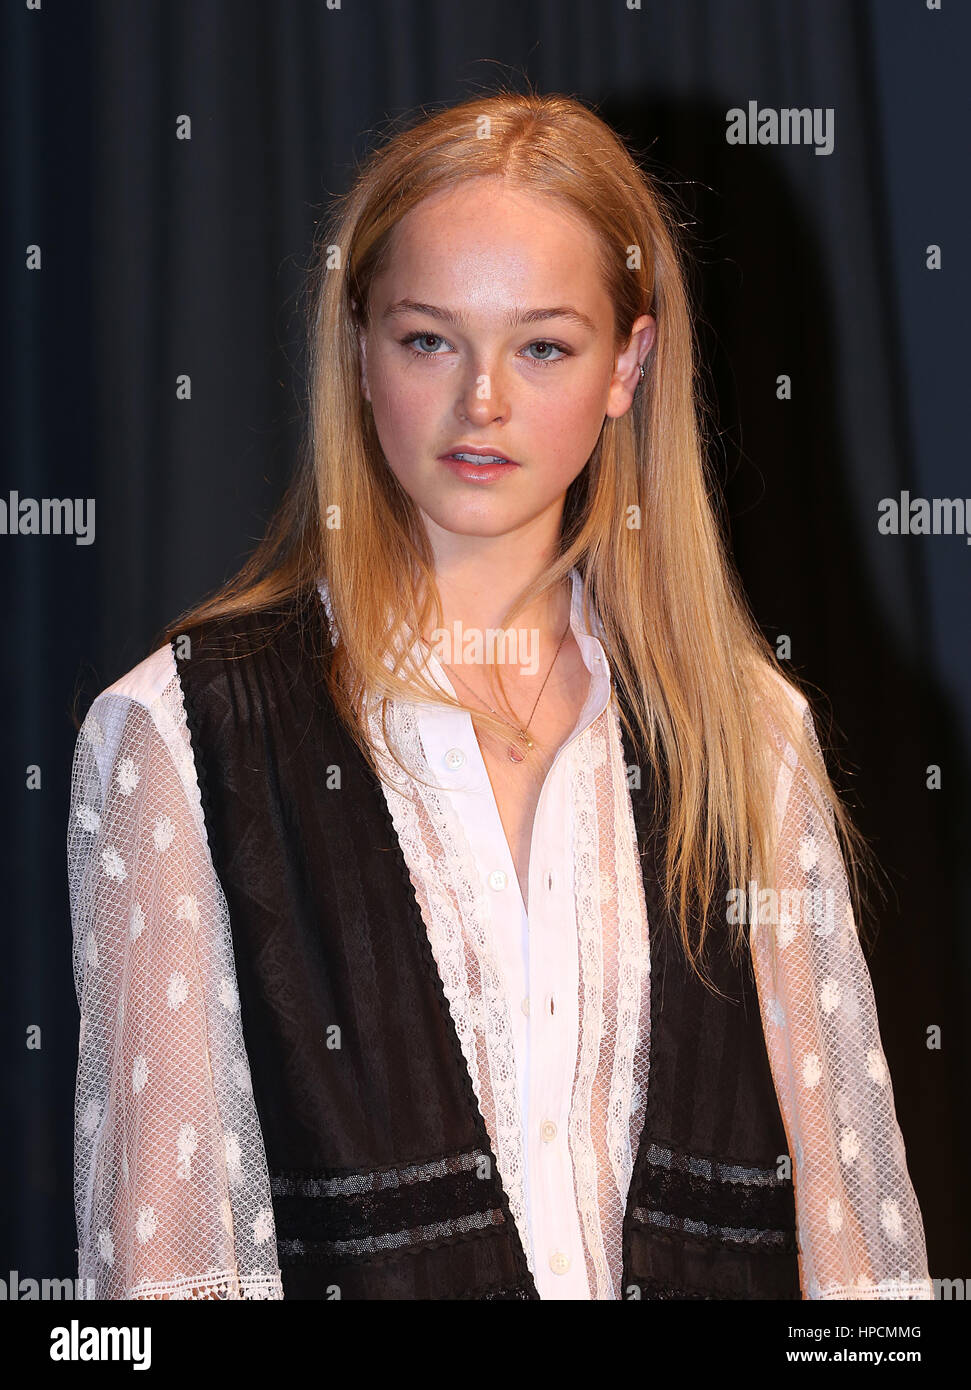 Jean Campbell attending the Burberry London Fashion Week Show at Makers  House, Manette Street, London Stock Photo - Alamy